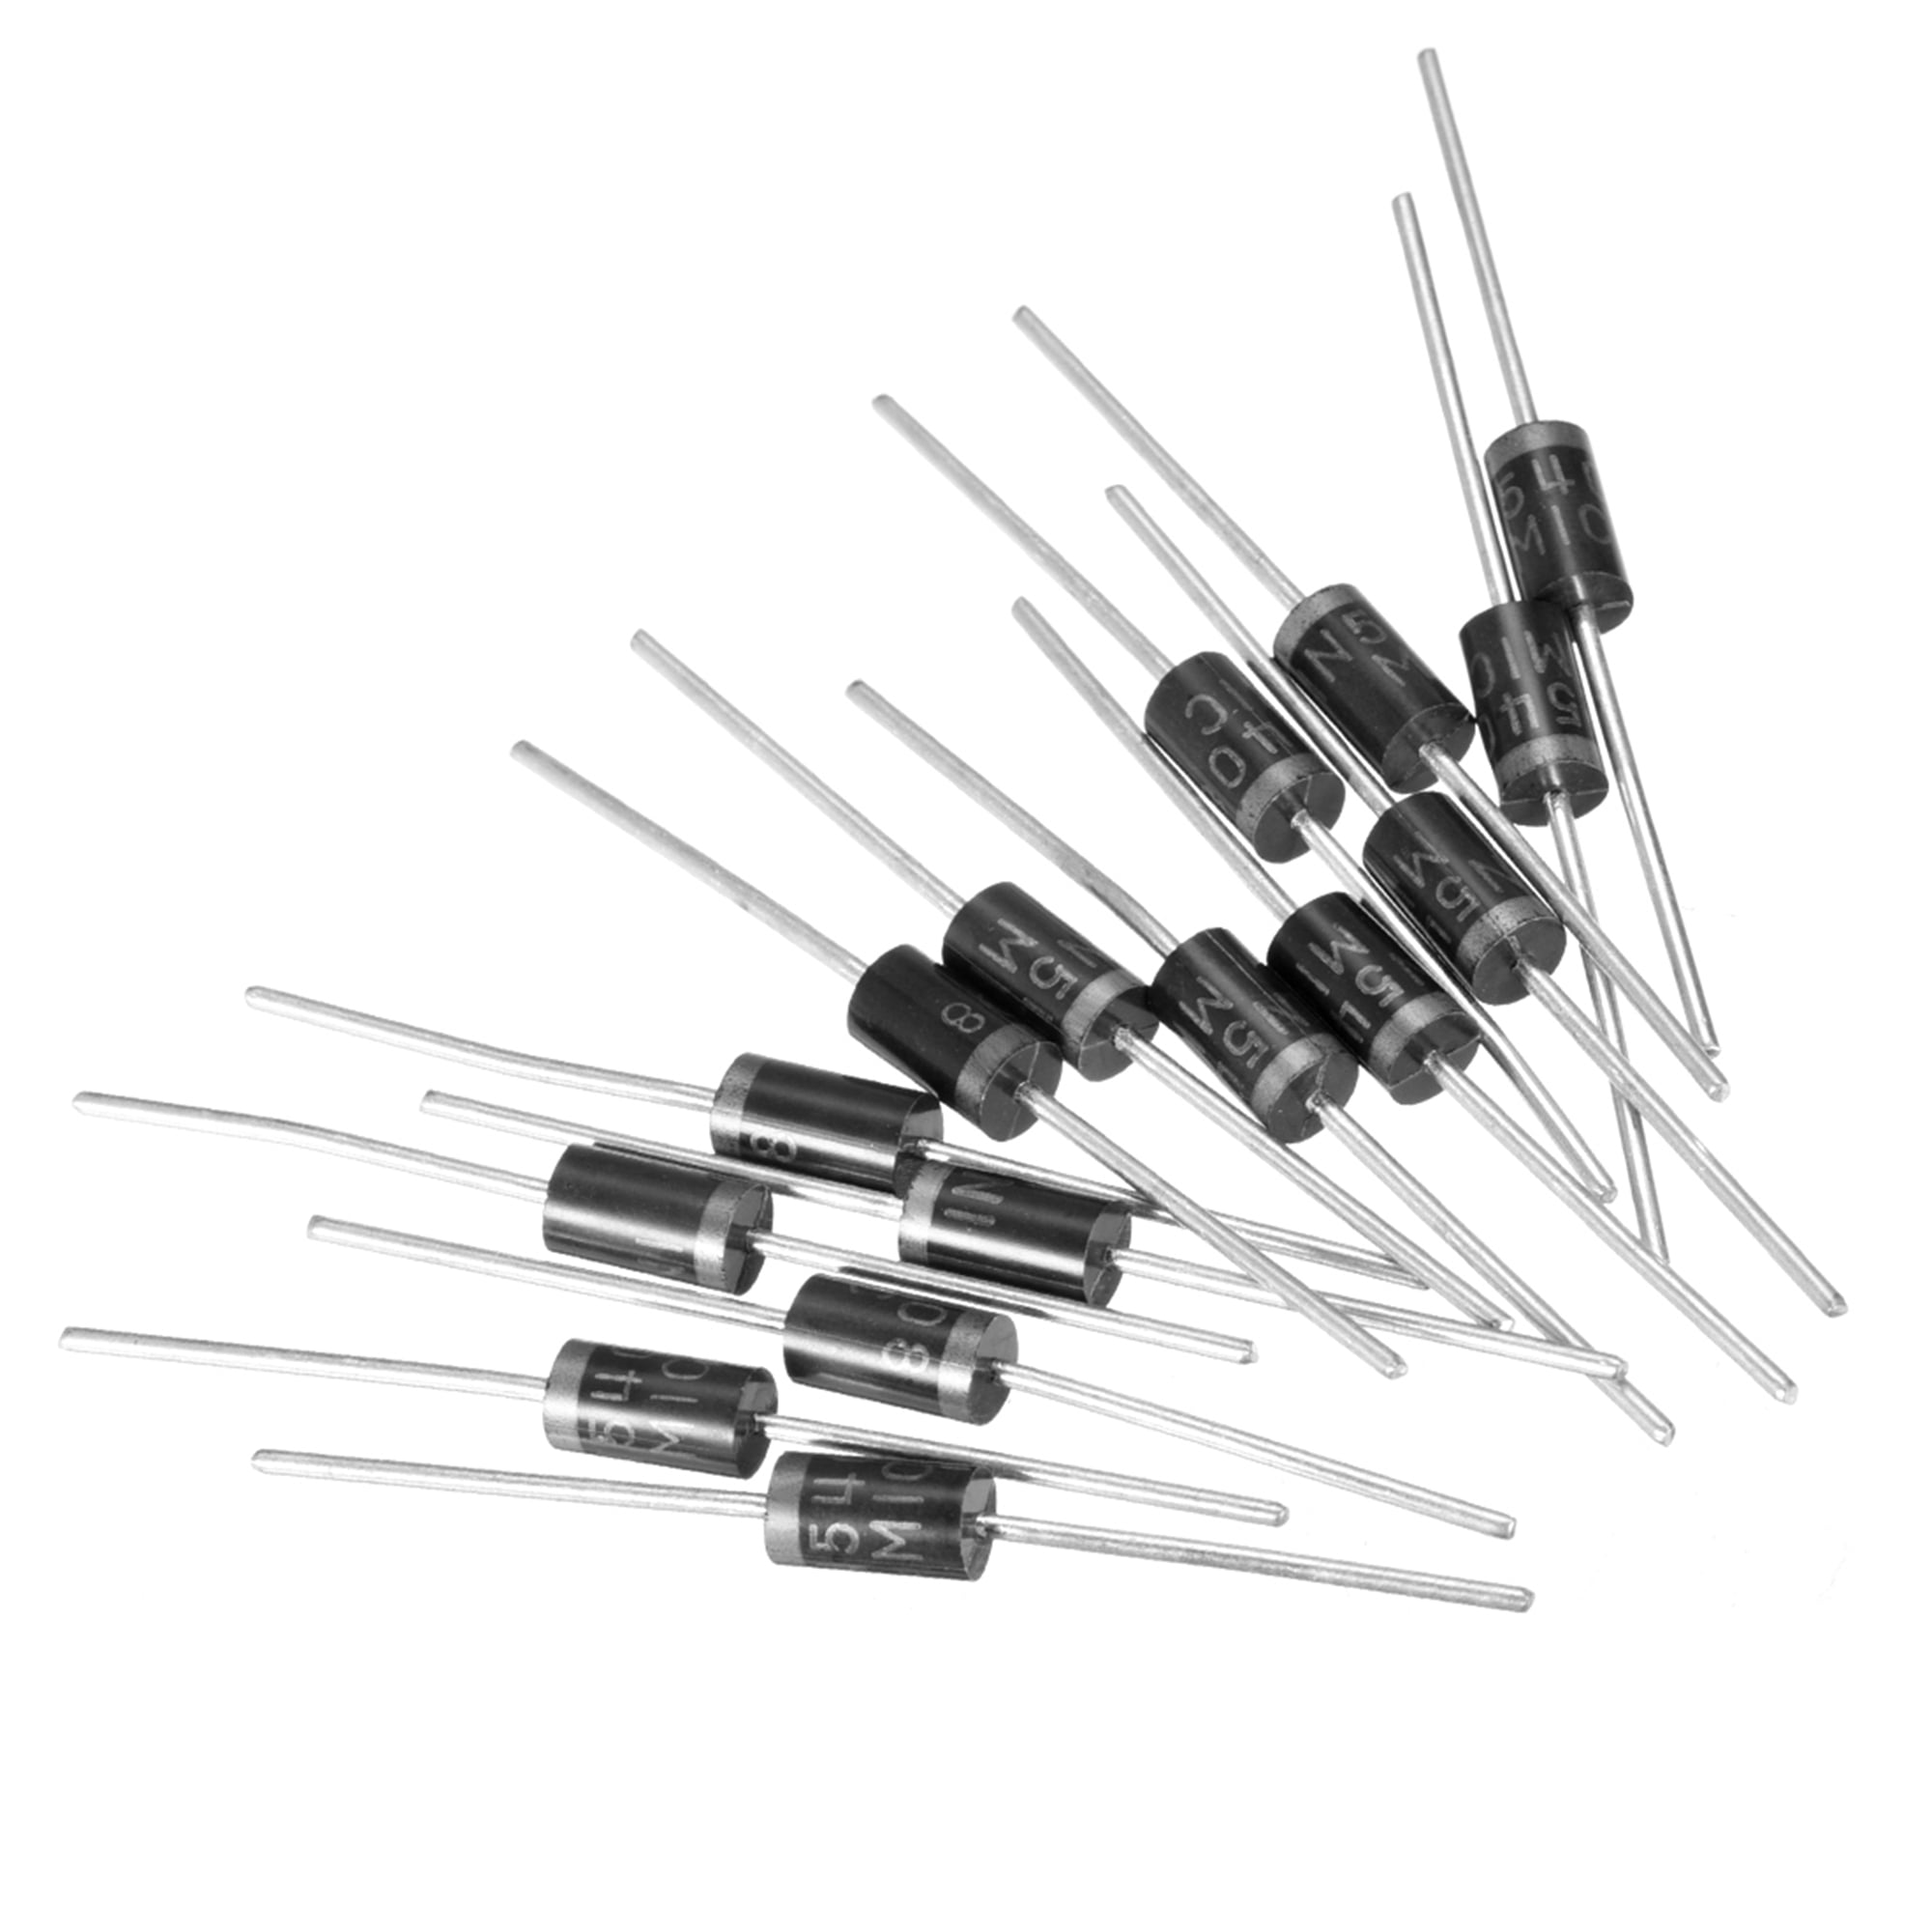 uxcell 1N5401 Rectifier Diode 3A 100V Axial Electronic Silicon Diodes 4pcs